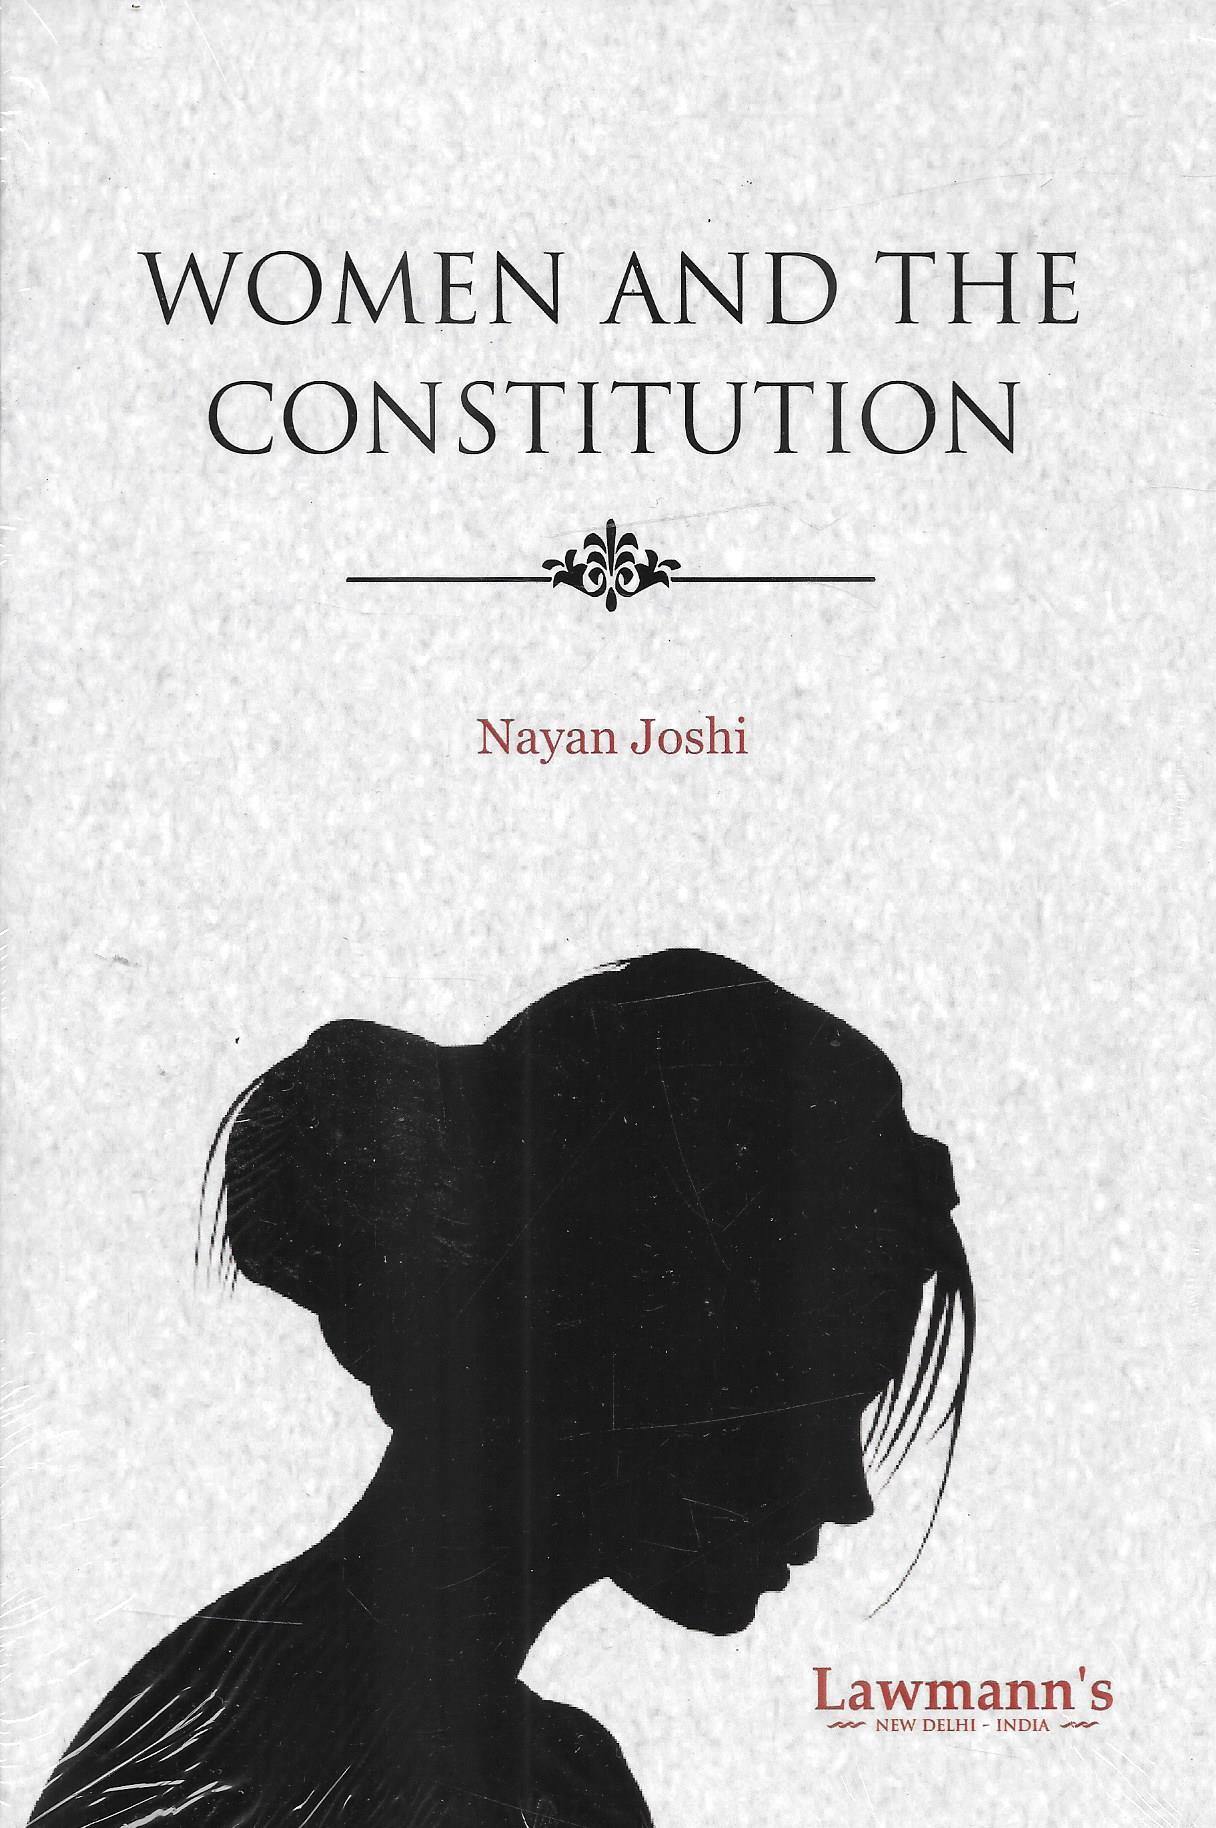 Women and the Constitution - M&J Services